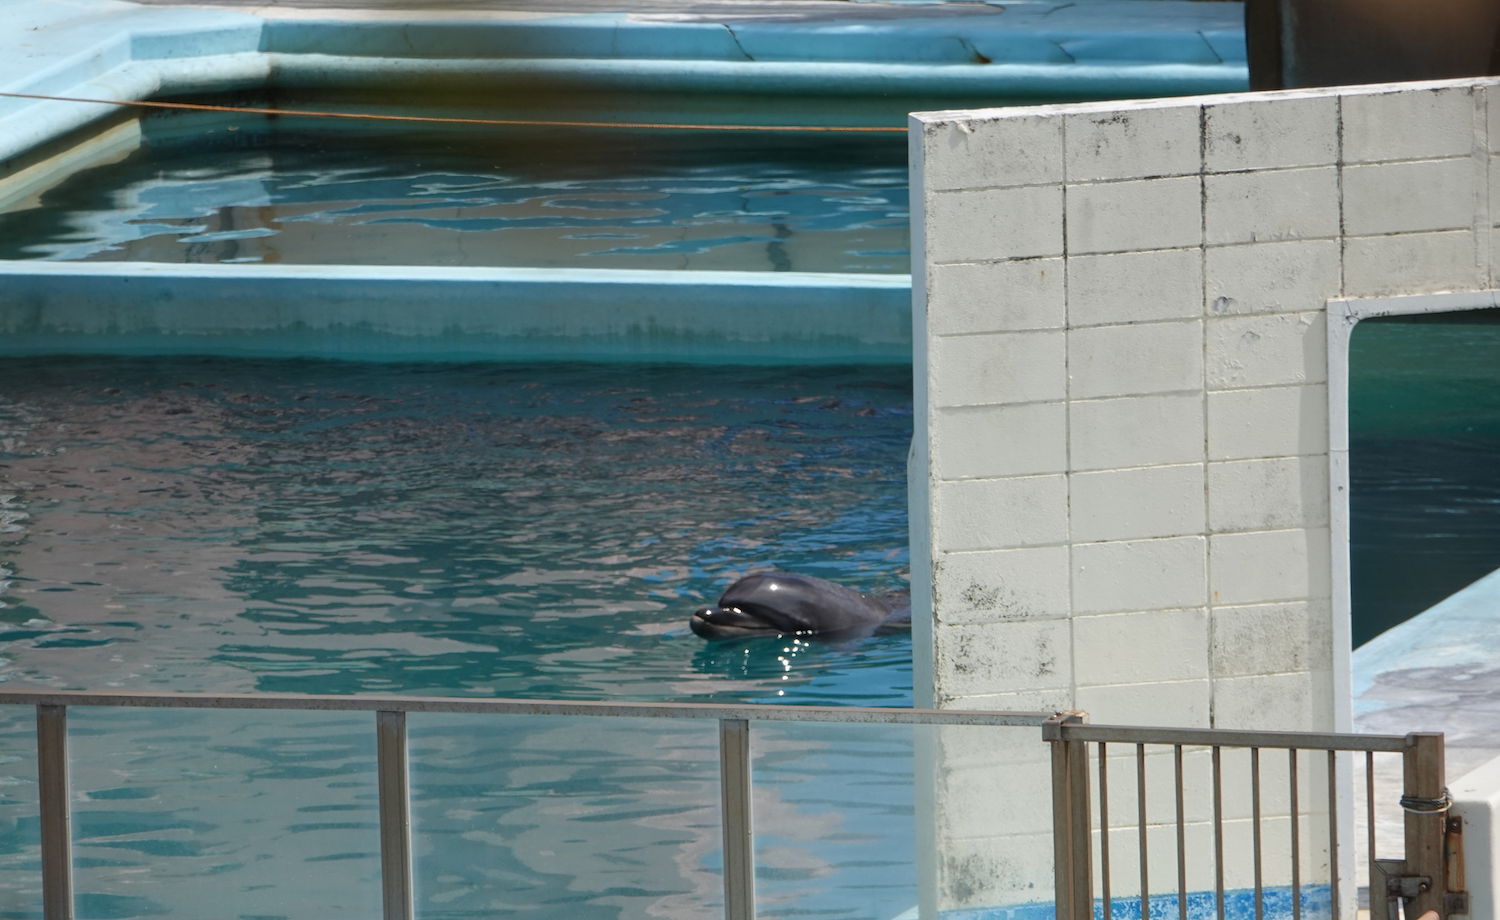 www.dolphinproject.com